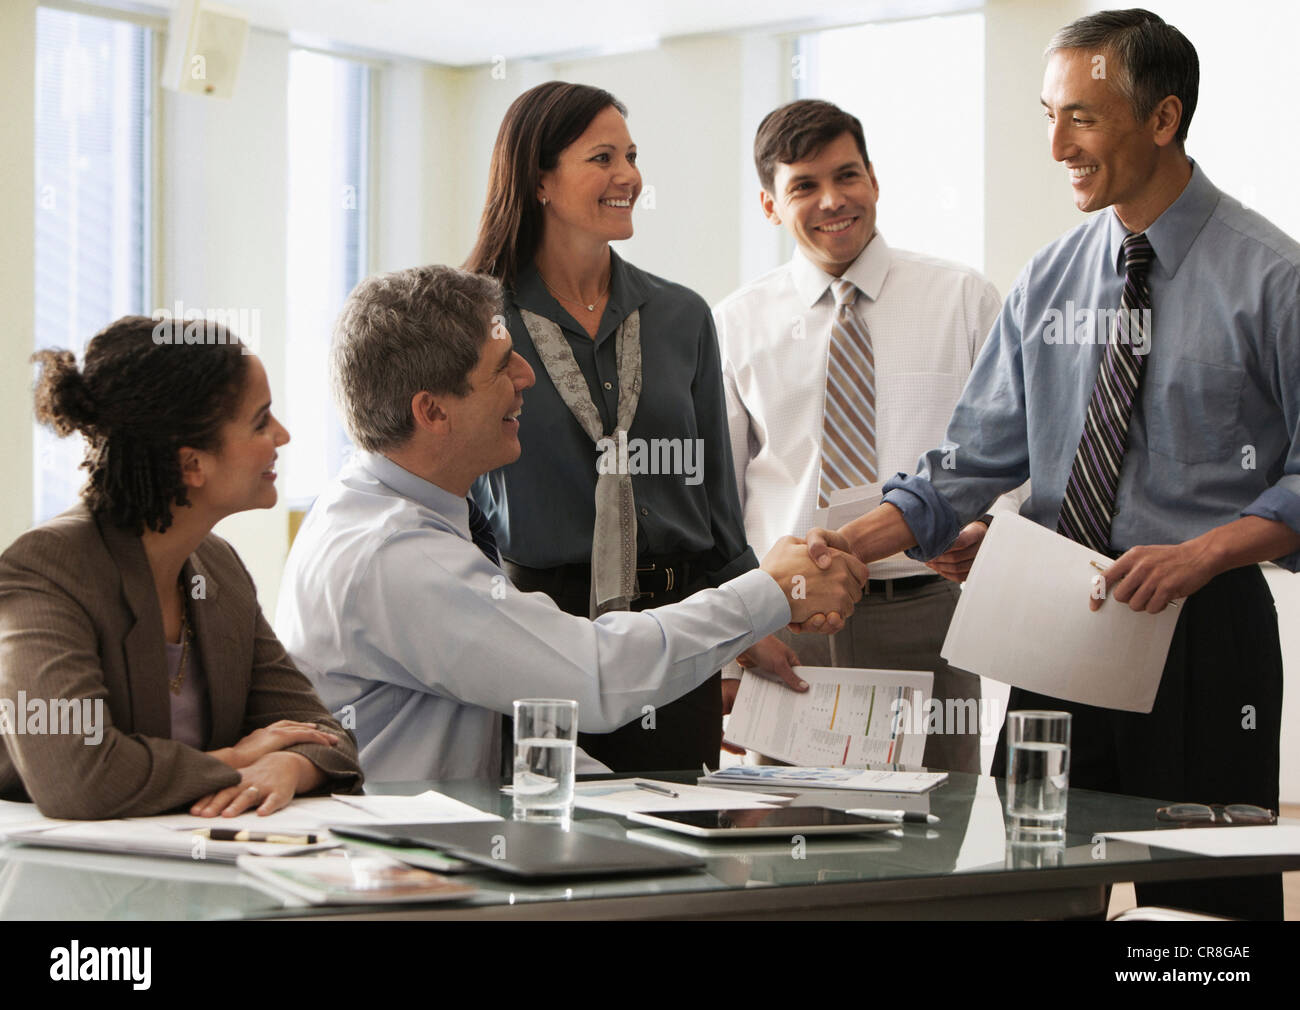 Businessman shaking hands in office with colleagues Stock Photo